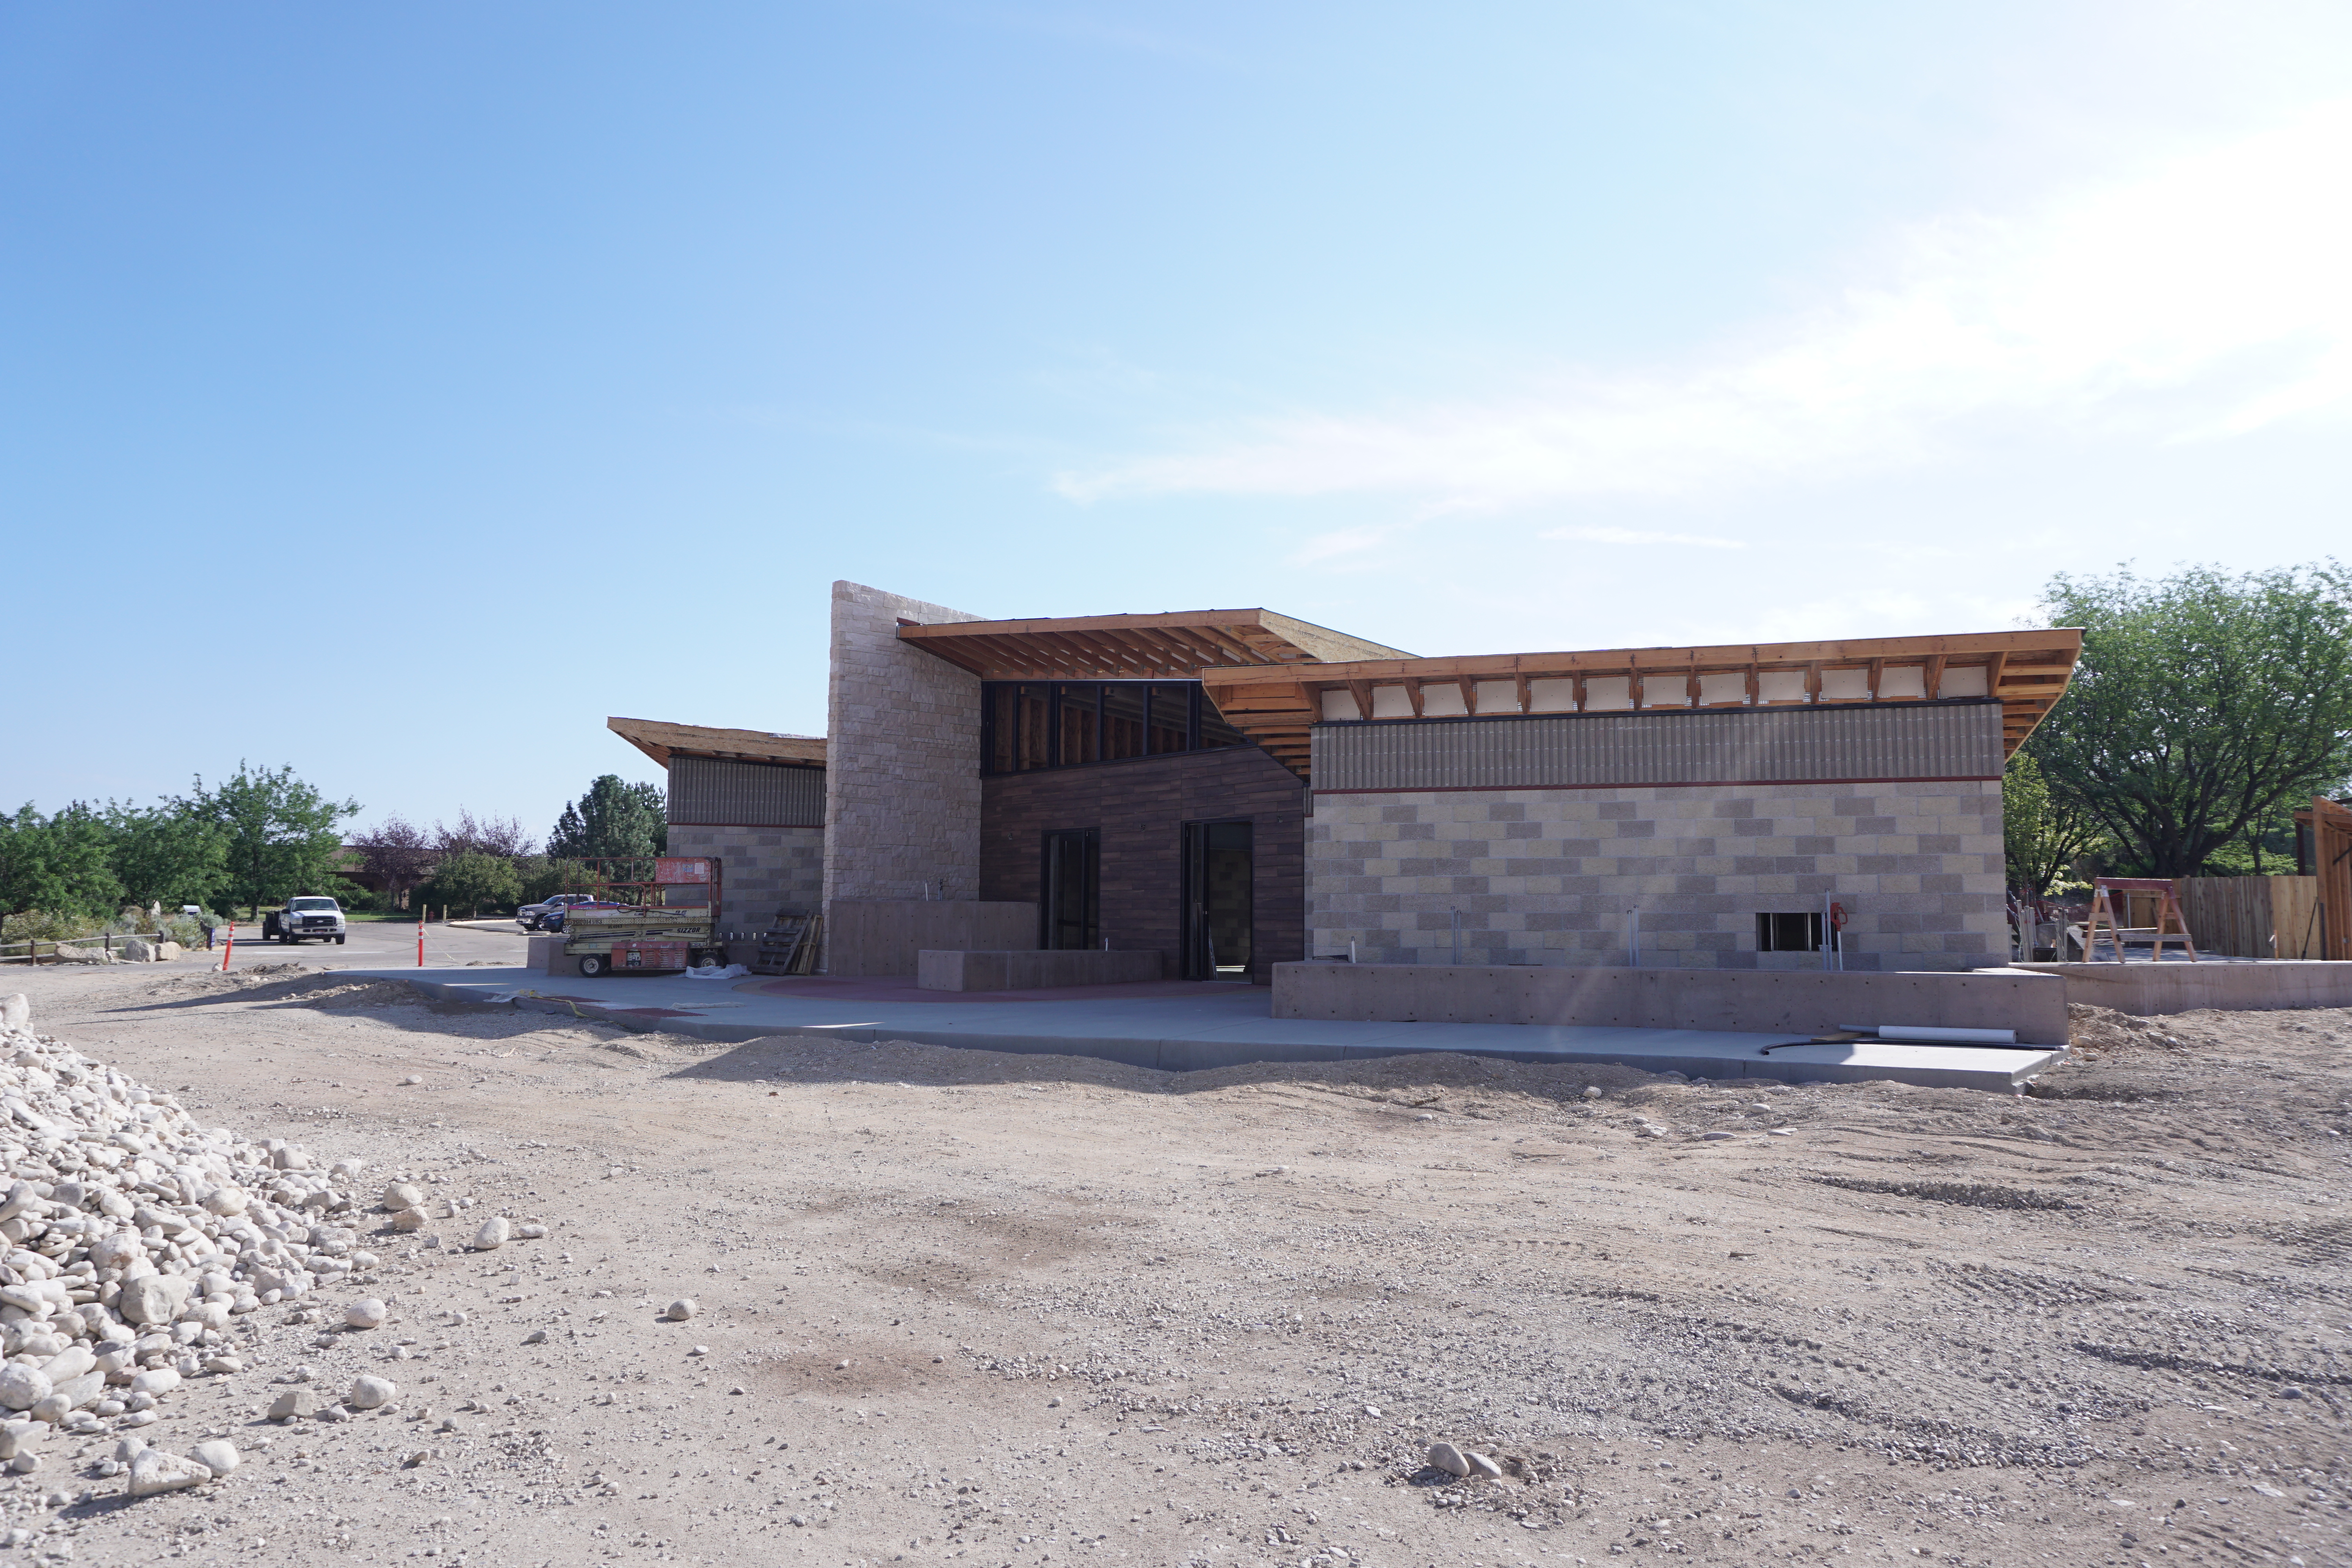 The new Welcome Center is well underway and will provide a place for guests to enter and become oriented for their visit.